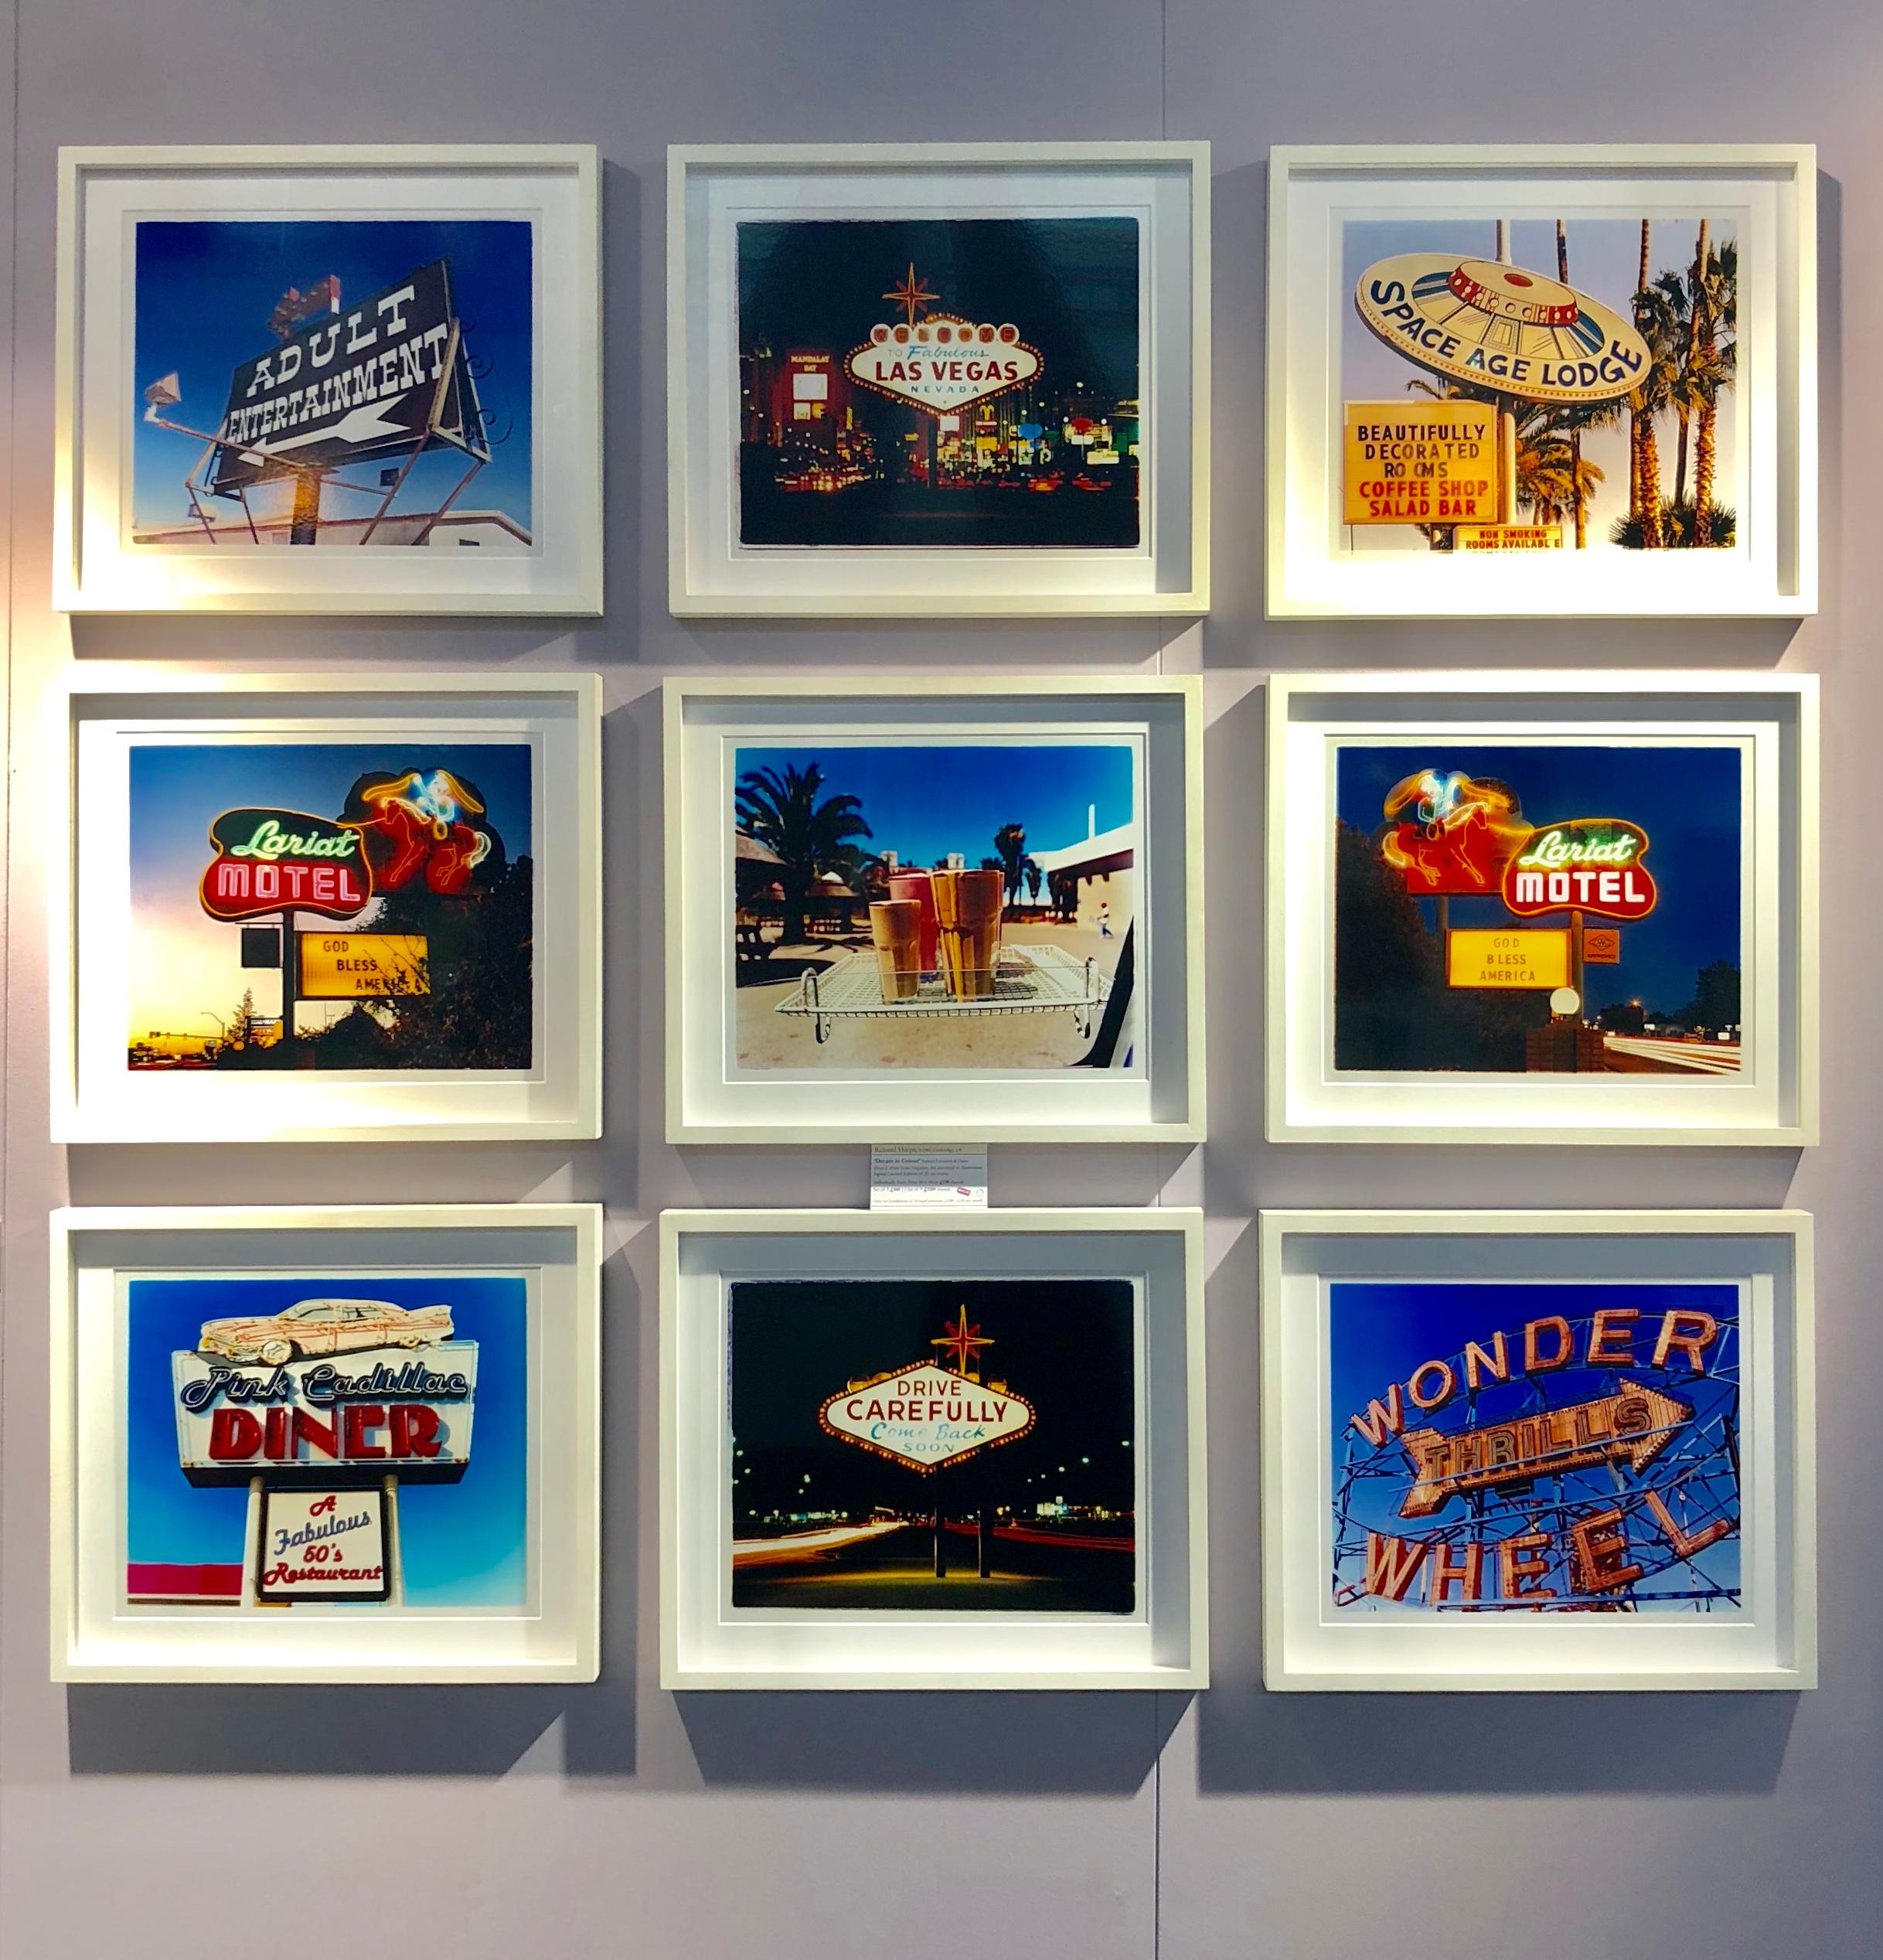 Part of Richard Heeps 'Dream in Colour' Series, this is one of his classic American signs. The iconic Las Vegas sign is captured here at night with such vibrancy.

This artwork is a limited edition of 25, gloss photographic print, dry-mounted to